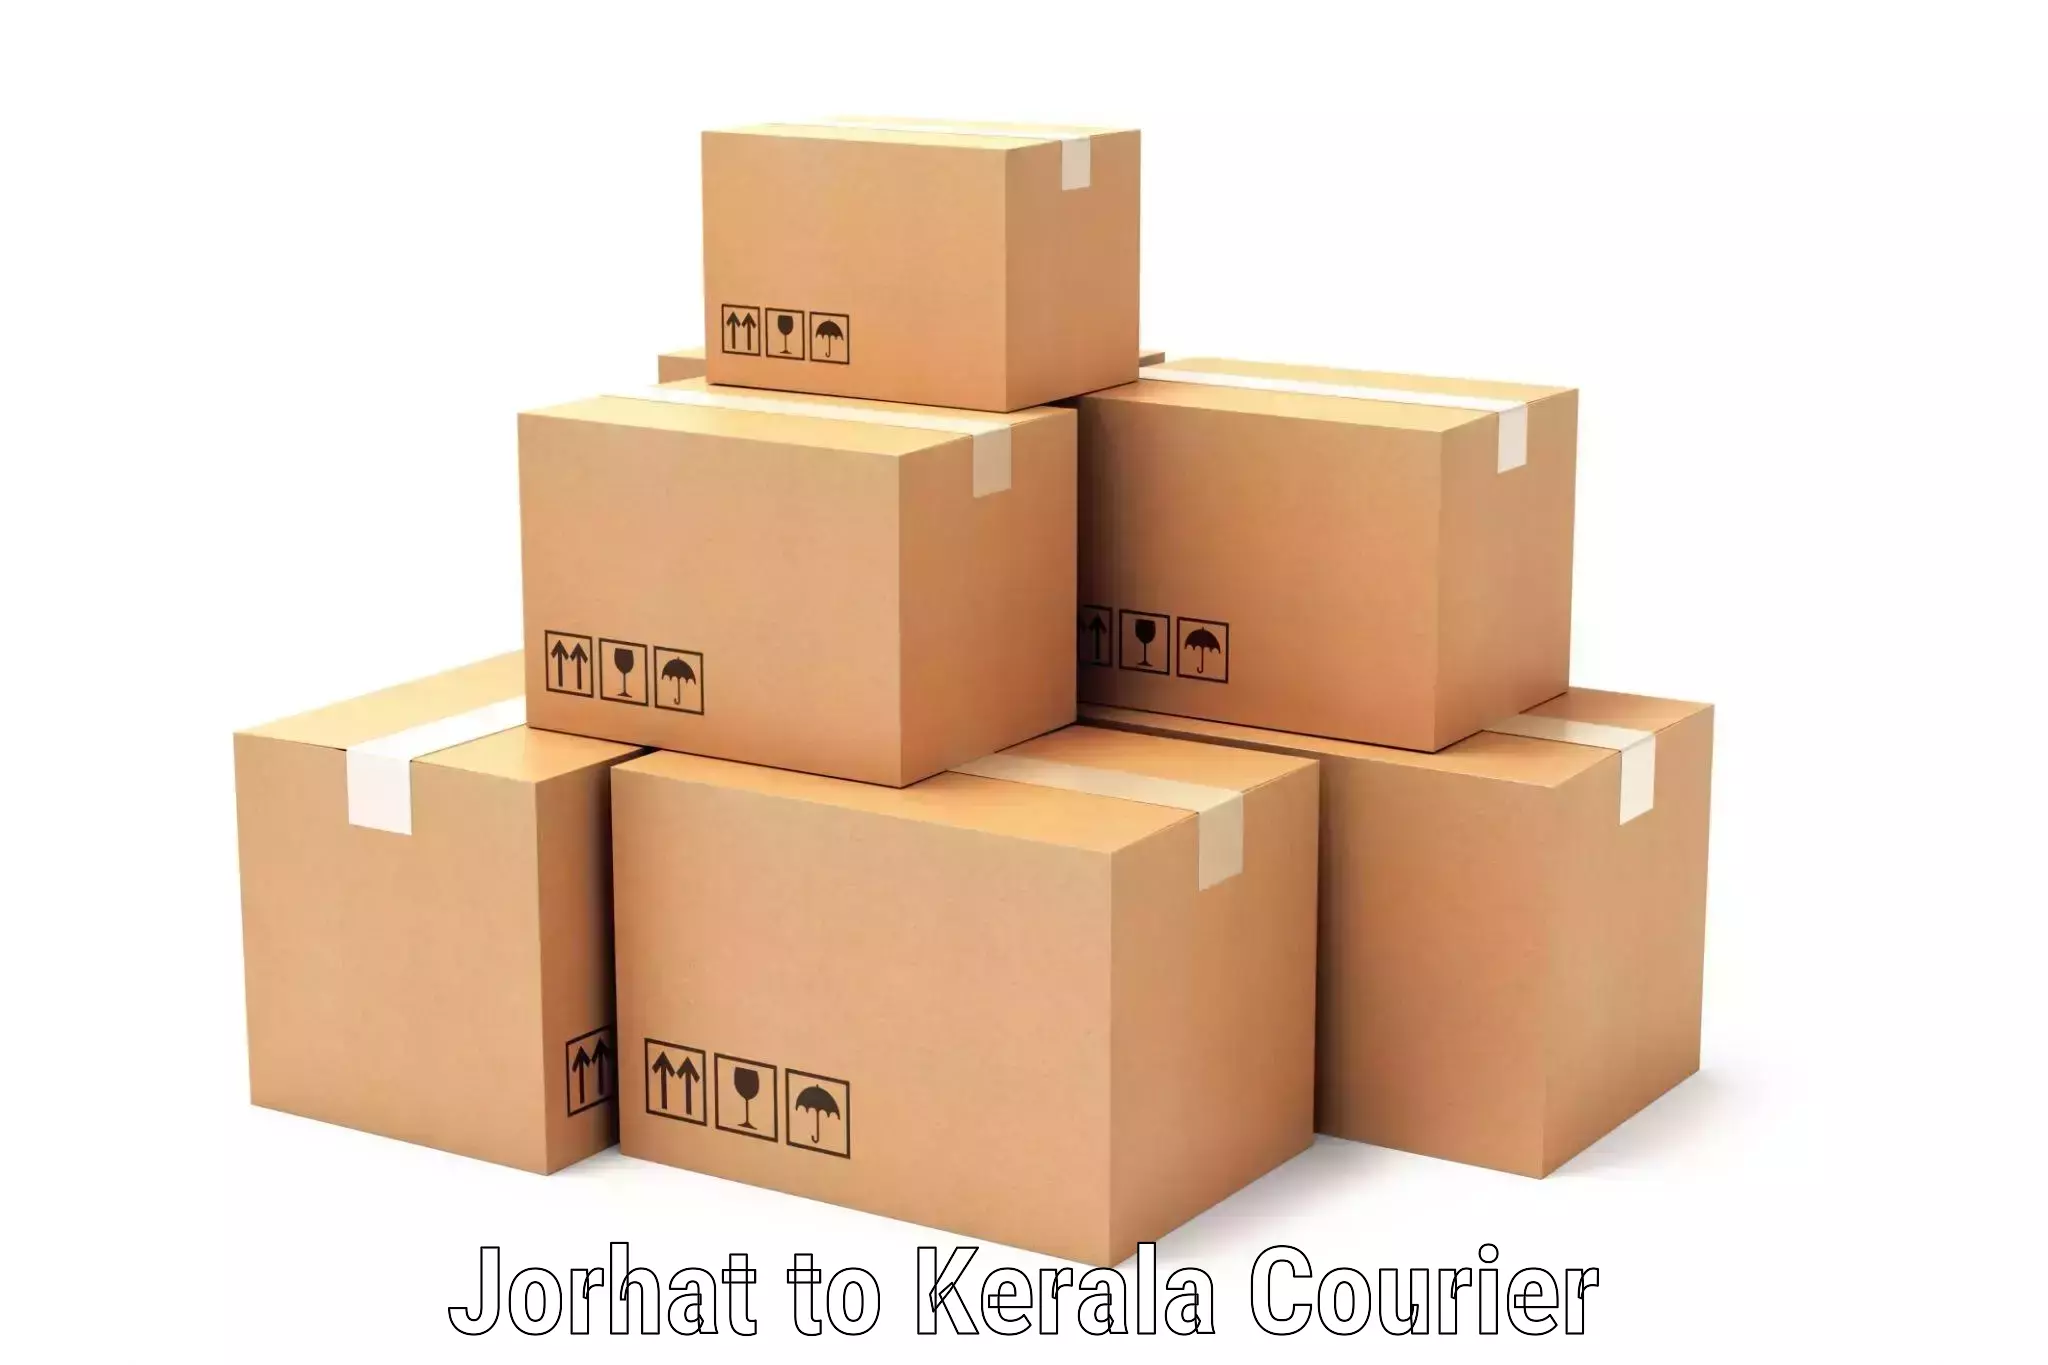 On-call courier service Jorhat to Kakkur